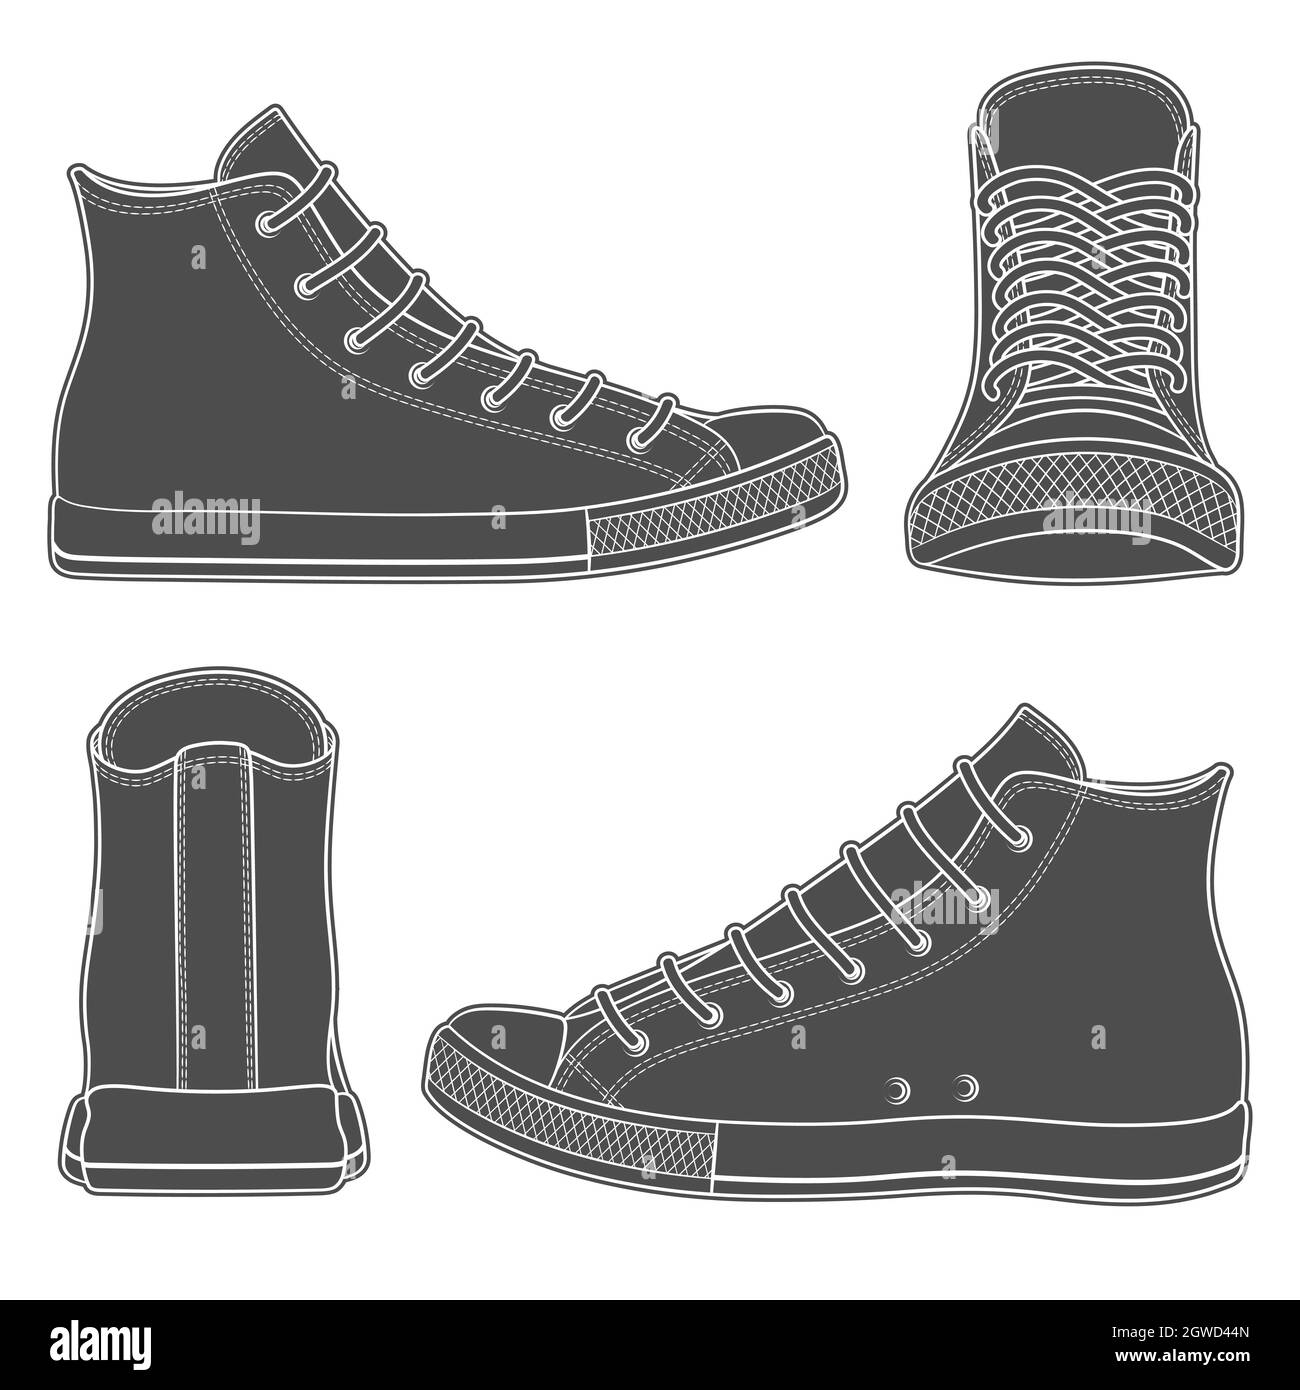 Set of black and white illustrations with sneakers, gumshoes. Isolated vector objects on white background. Stock Vector